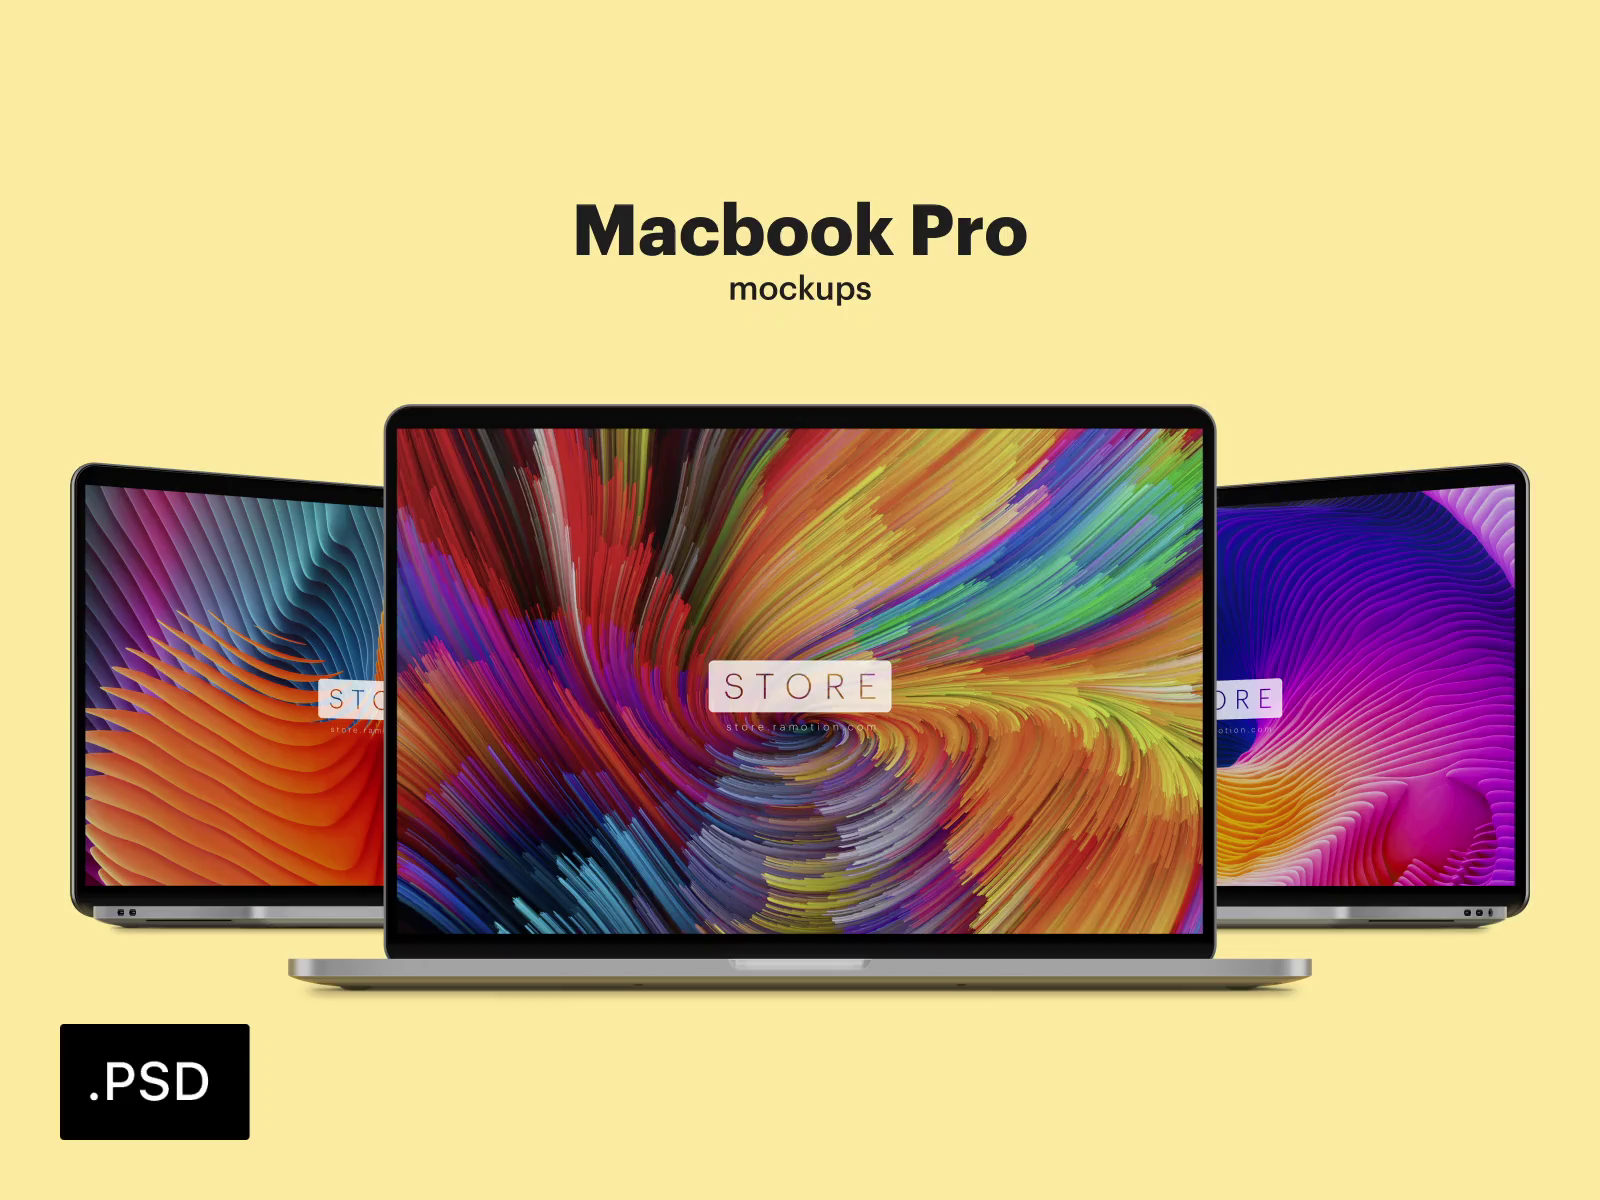 Download MacBook Pro Mockup by Ramotion on Dribbble